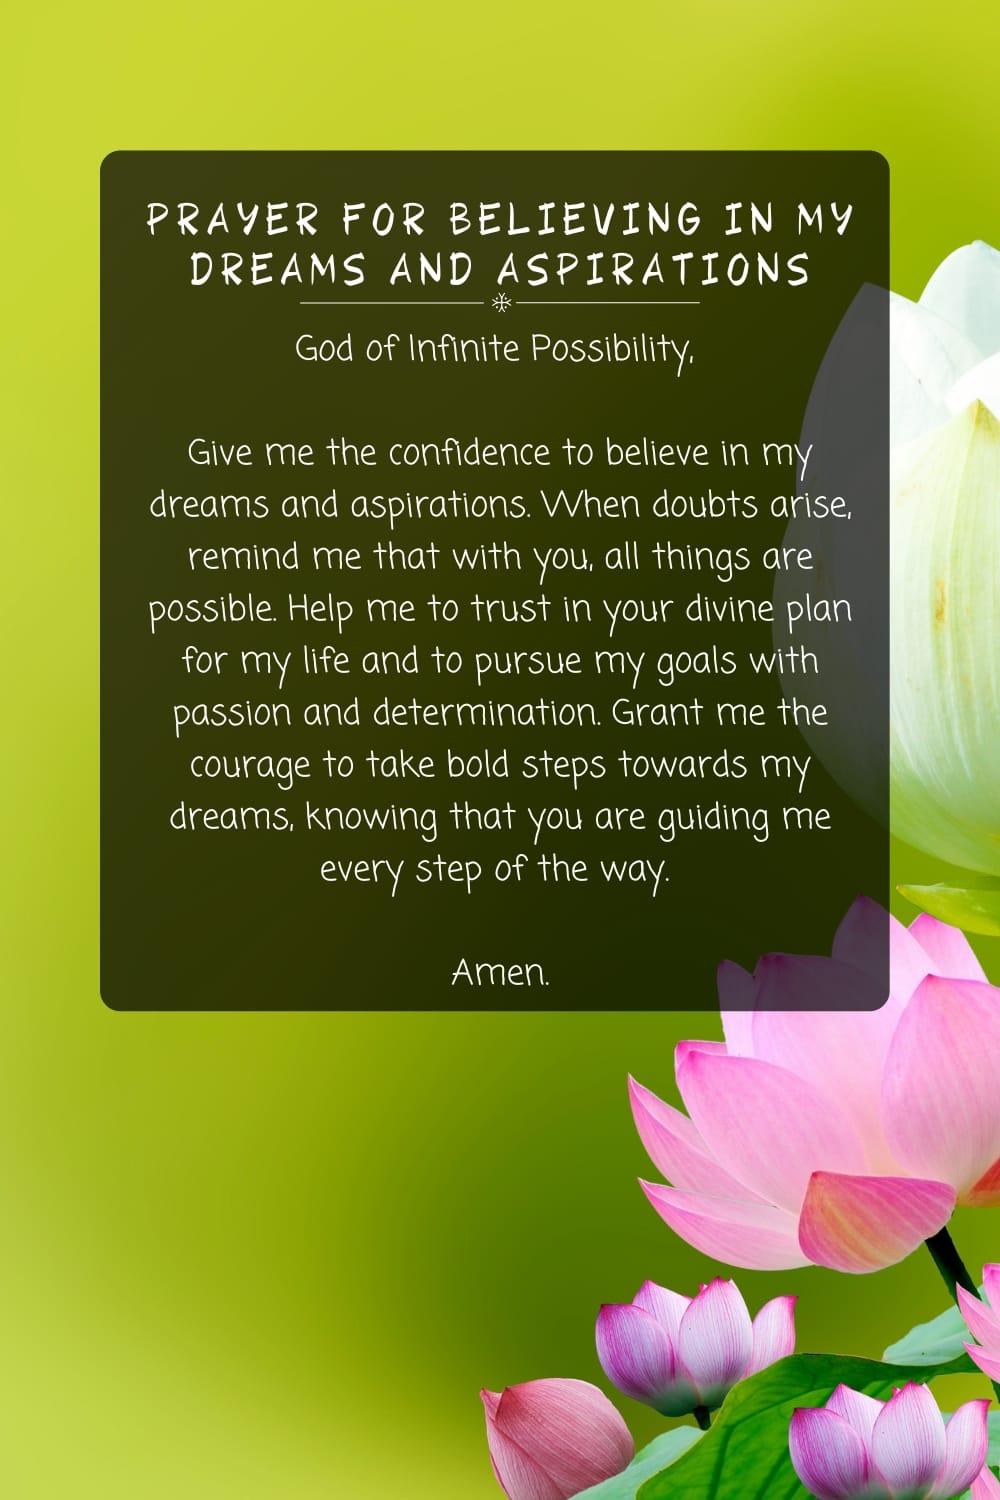 Prayer for Believing in My Dreams and Aspirations